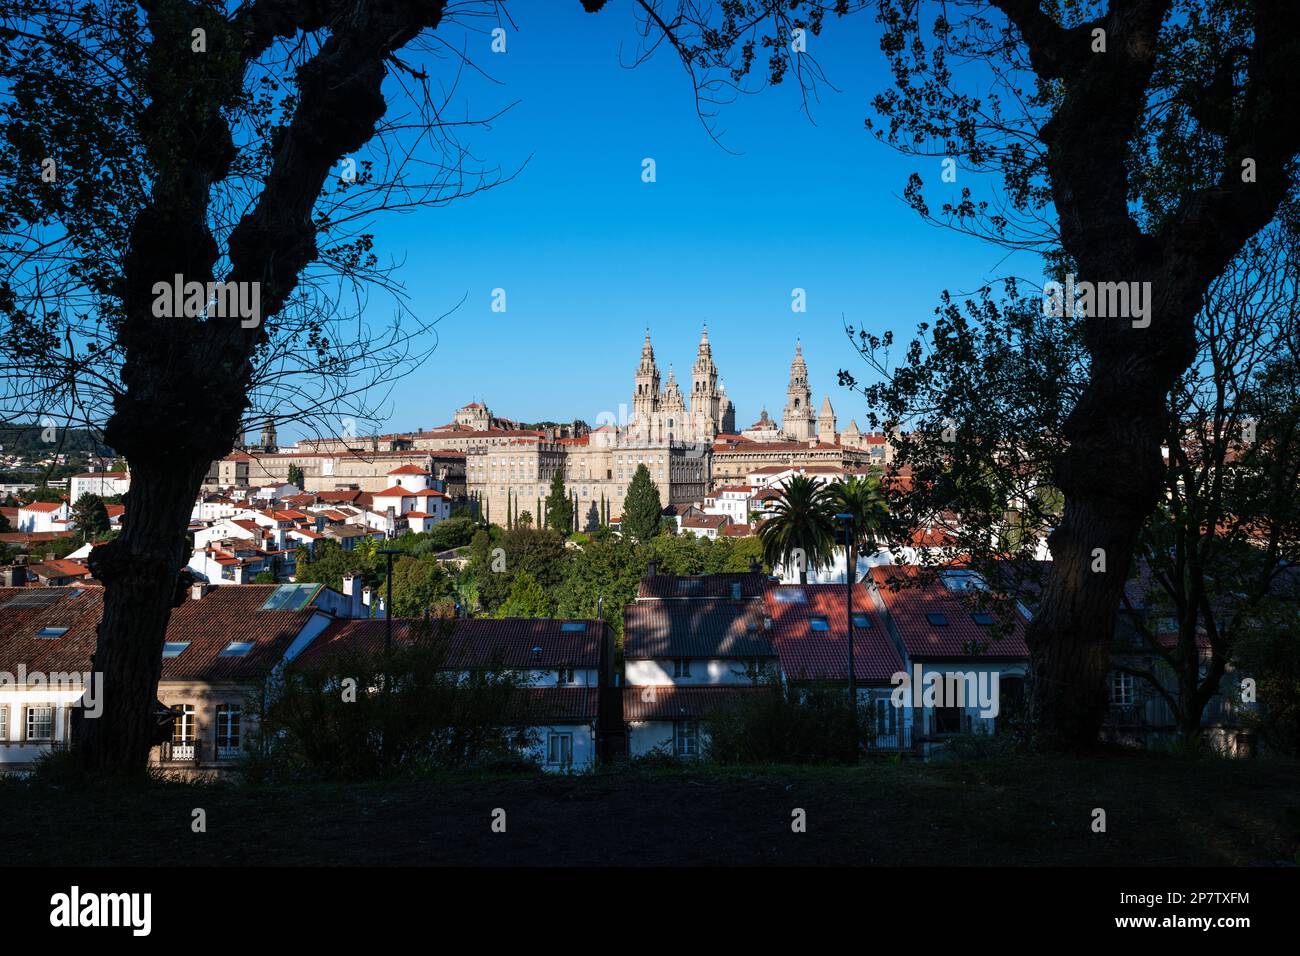 Panorama view of Santiago de Compostela as seen form the Parque de la Alameda park, with the towers of the cathedral to be recognized. Stock Photo